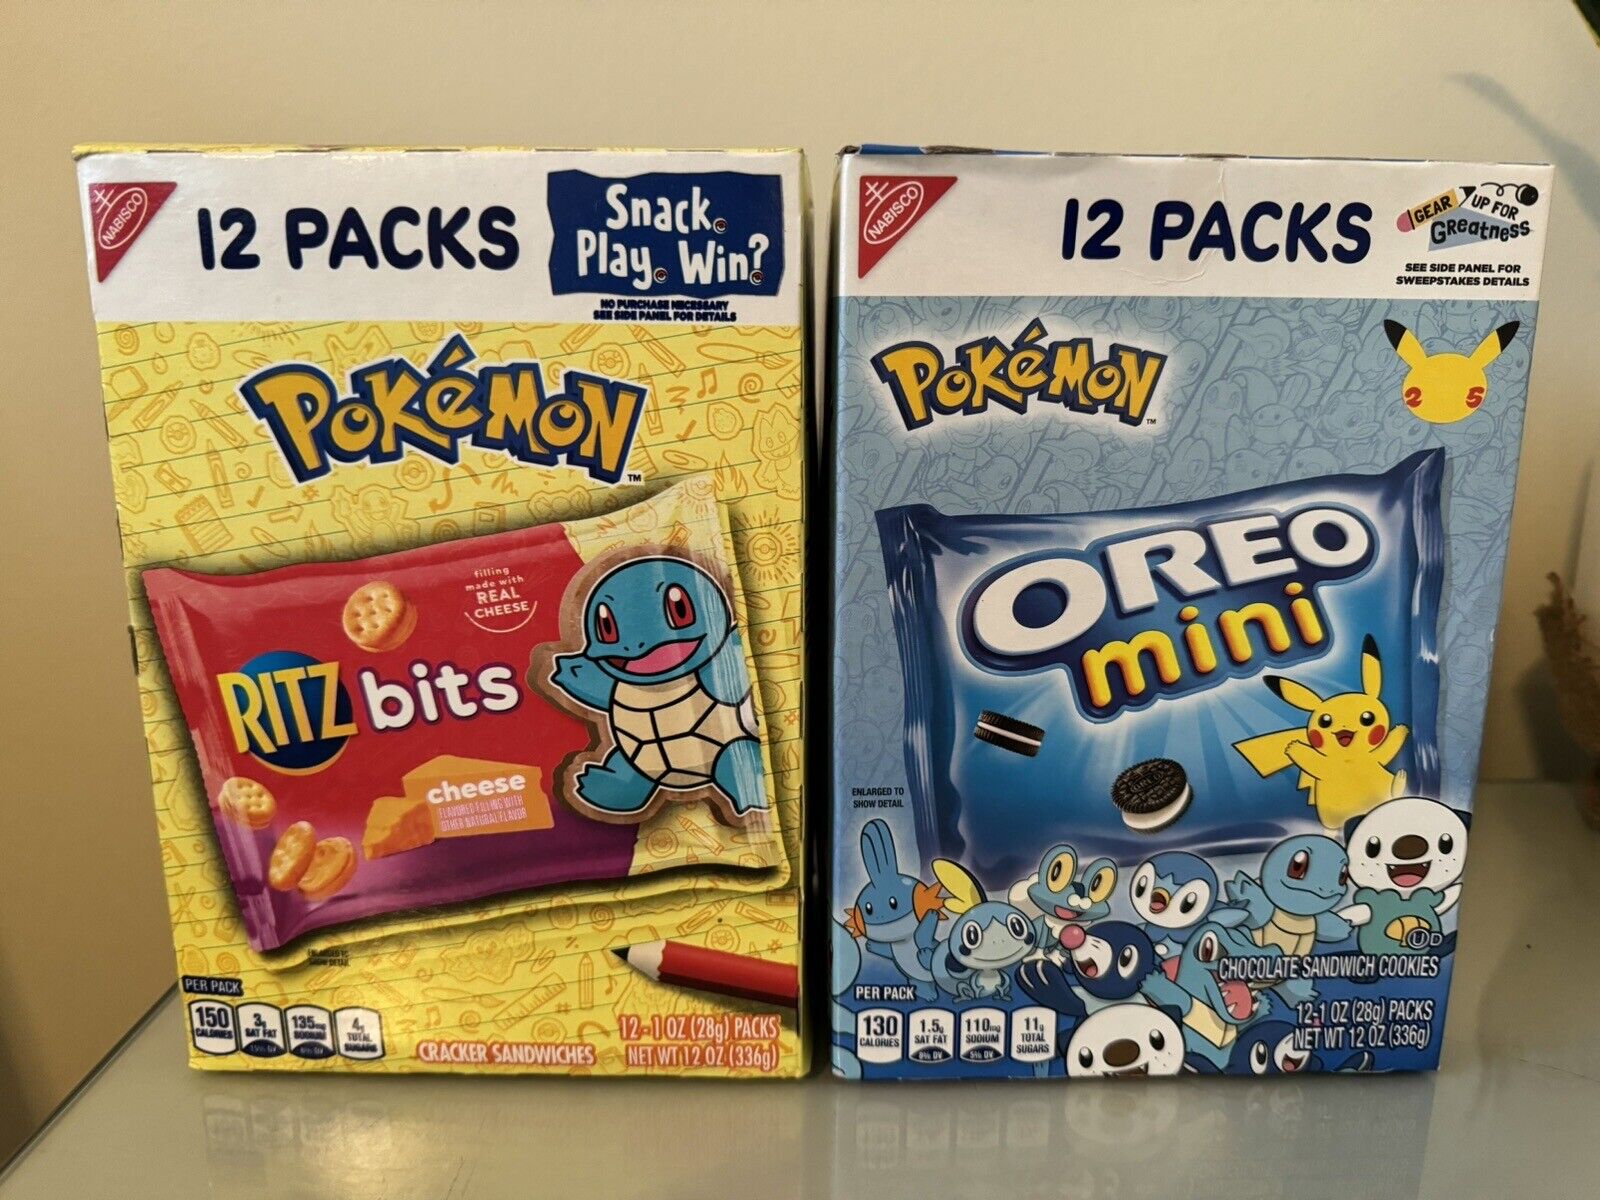 Pokémon Oreo Ritz Bits Nabisco Pikachu and Squirtle Collectibles